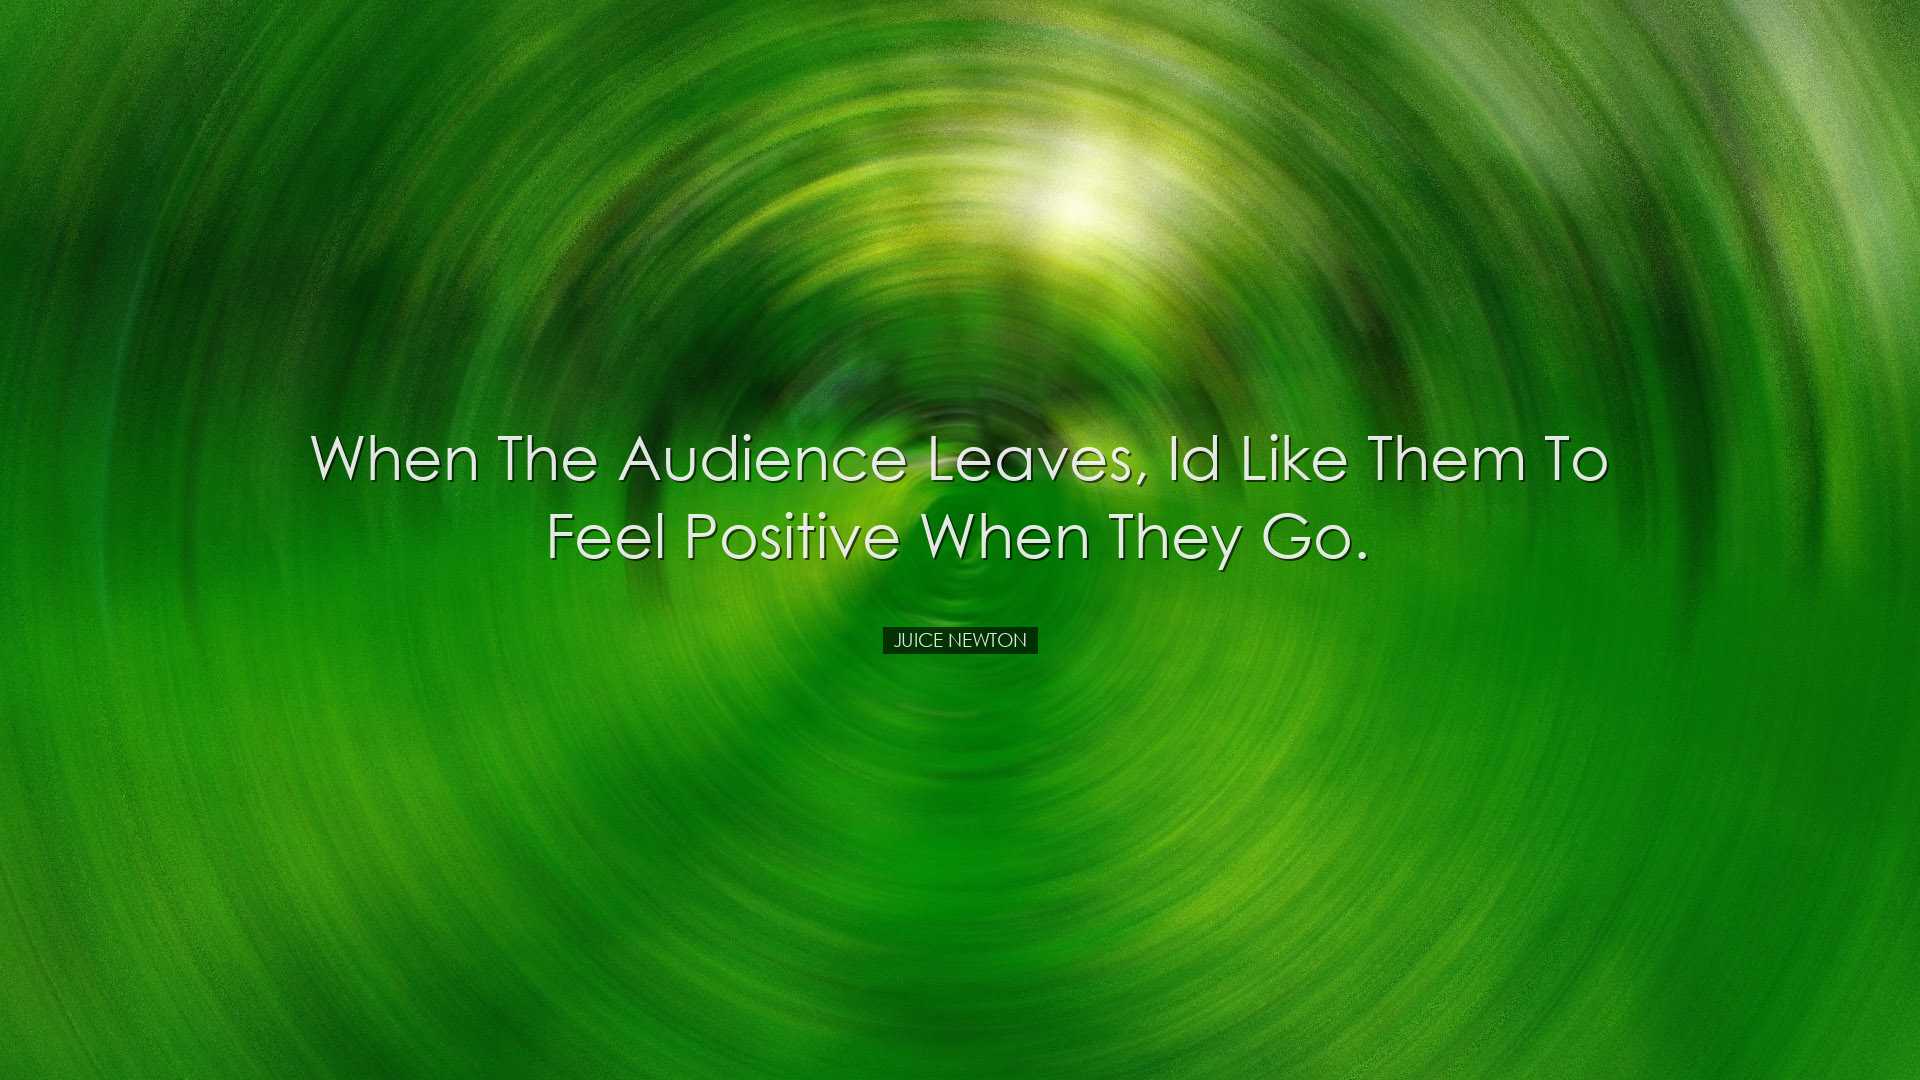 When the audience leaves, Id like them to feel positive when they